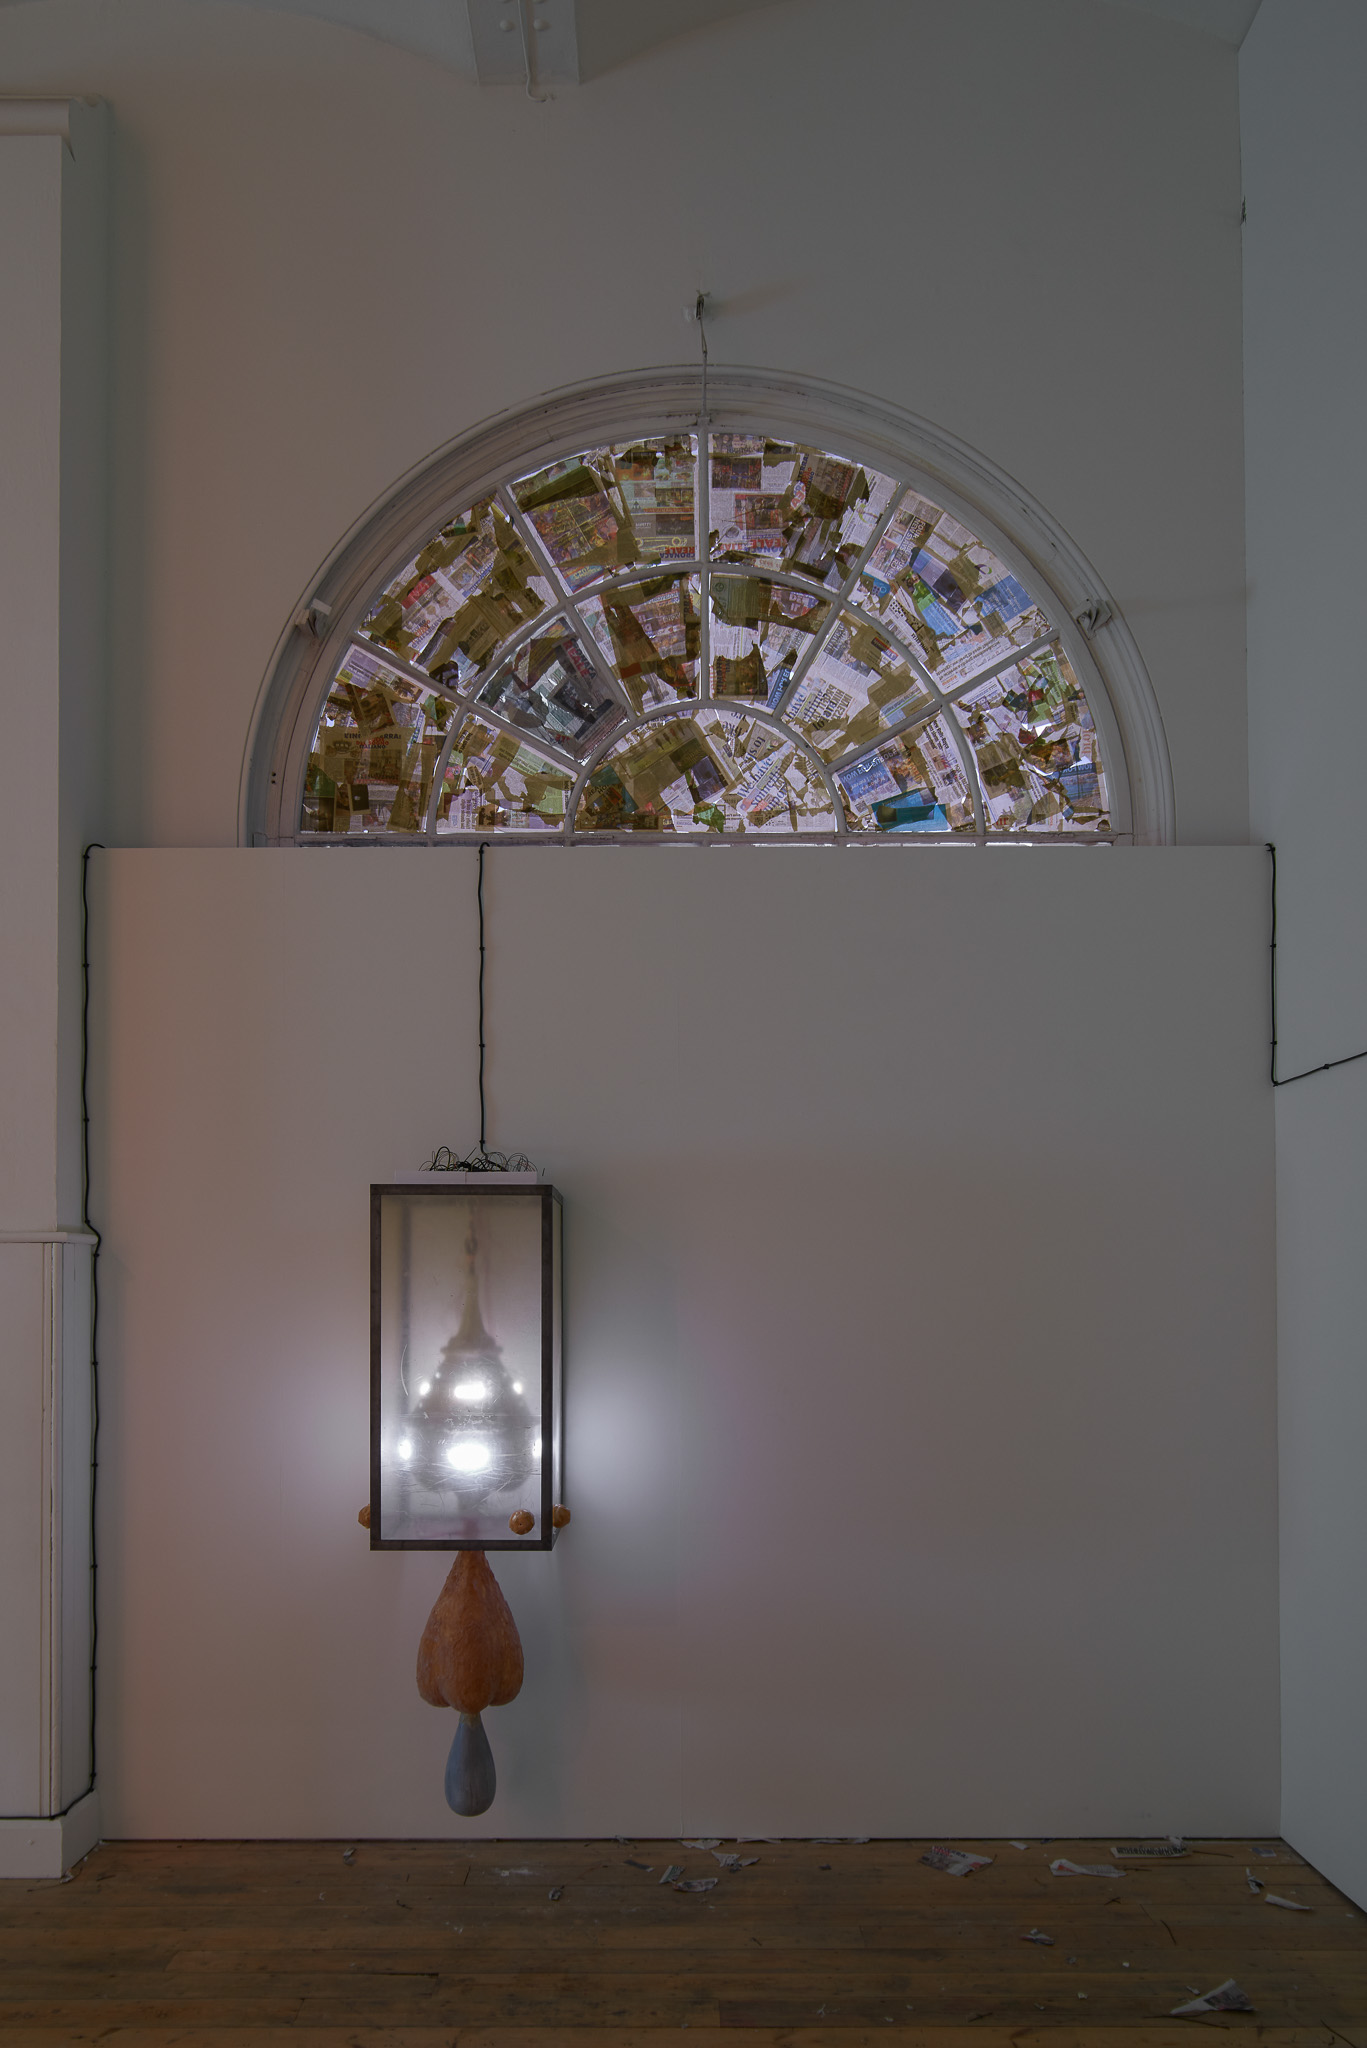 The Wick - Louis Morlae
Vvolmar, 2023
Installation view, Royal Academy Schools Show, 2023
Acrylic, steel, PLA, silicone, lime, paint, resin, rope, copper, LED, motion sensor, arduinos
175 x 50 x 50 cm
Photo: Andy Keate
